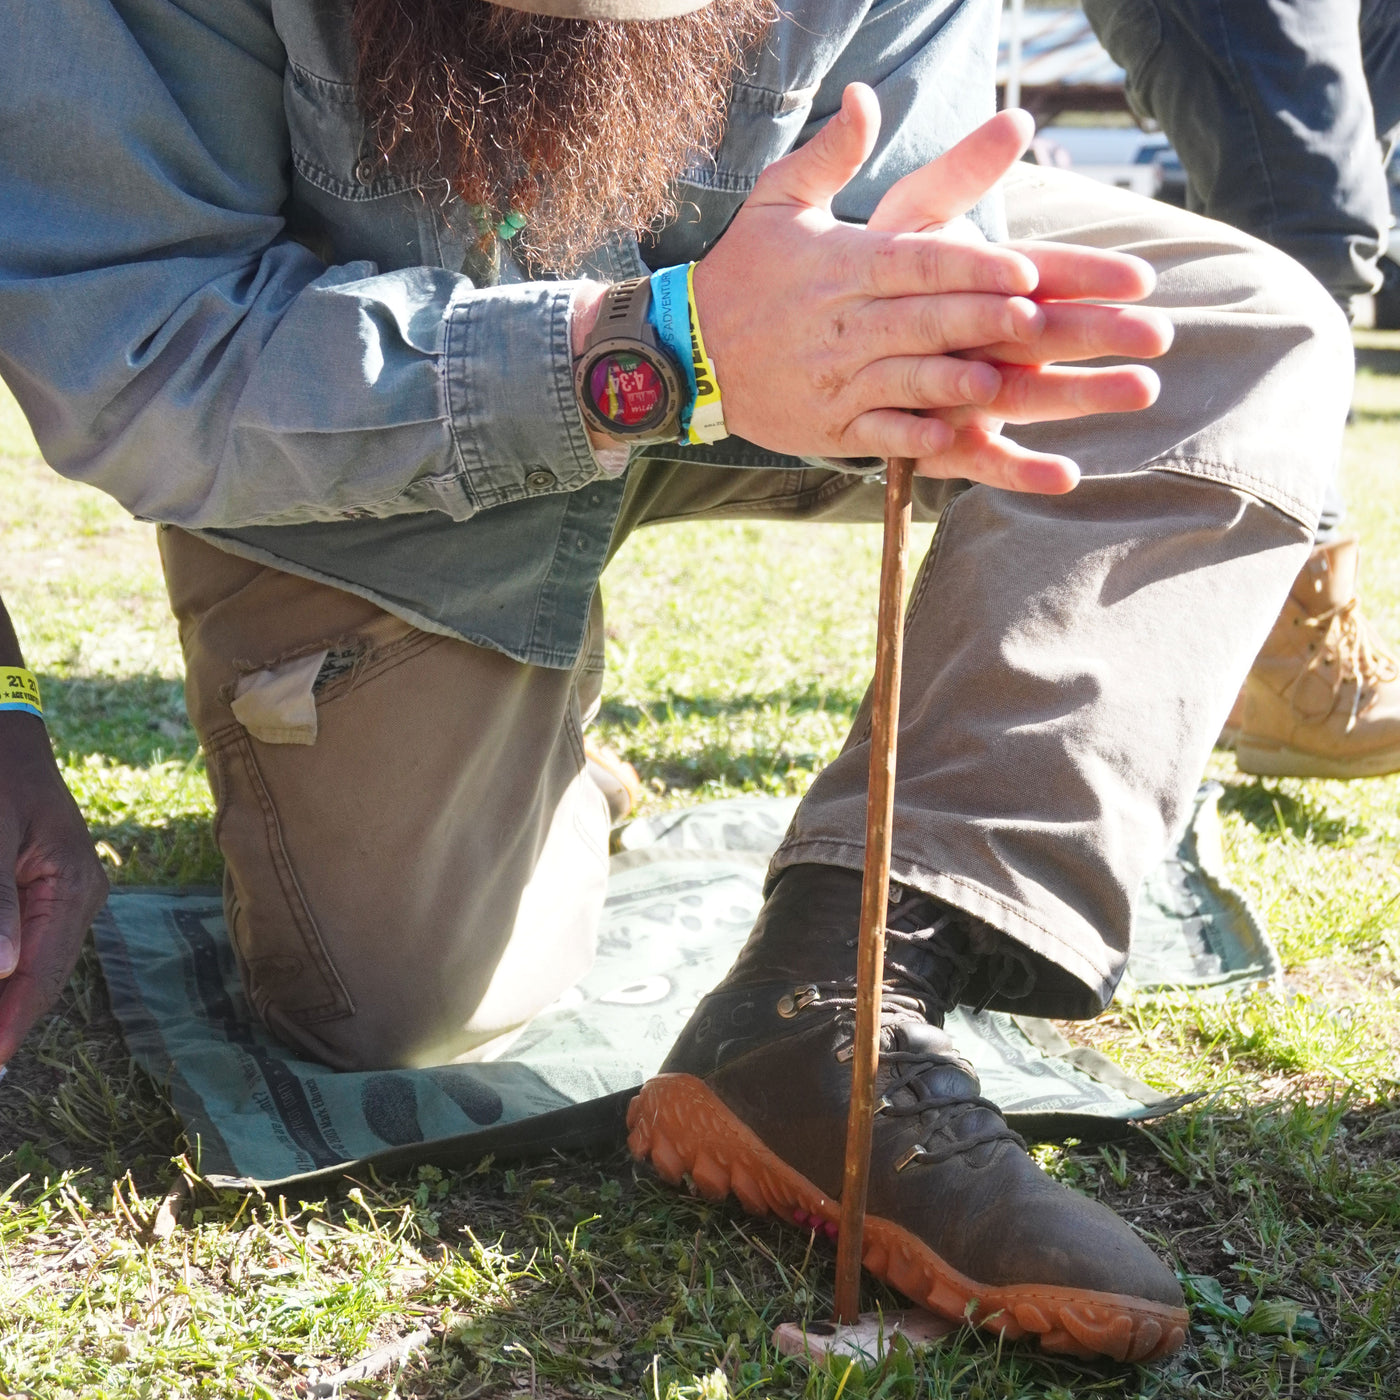 Wazoo groundcloth used as kneeling pad while making a hand drill fire